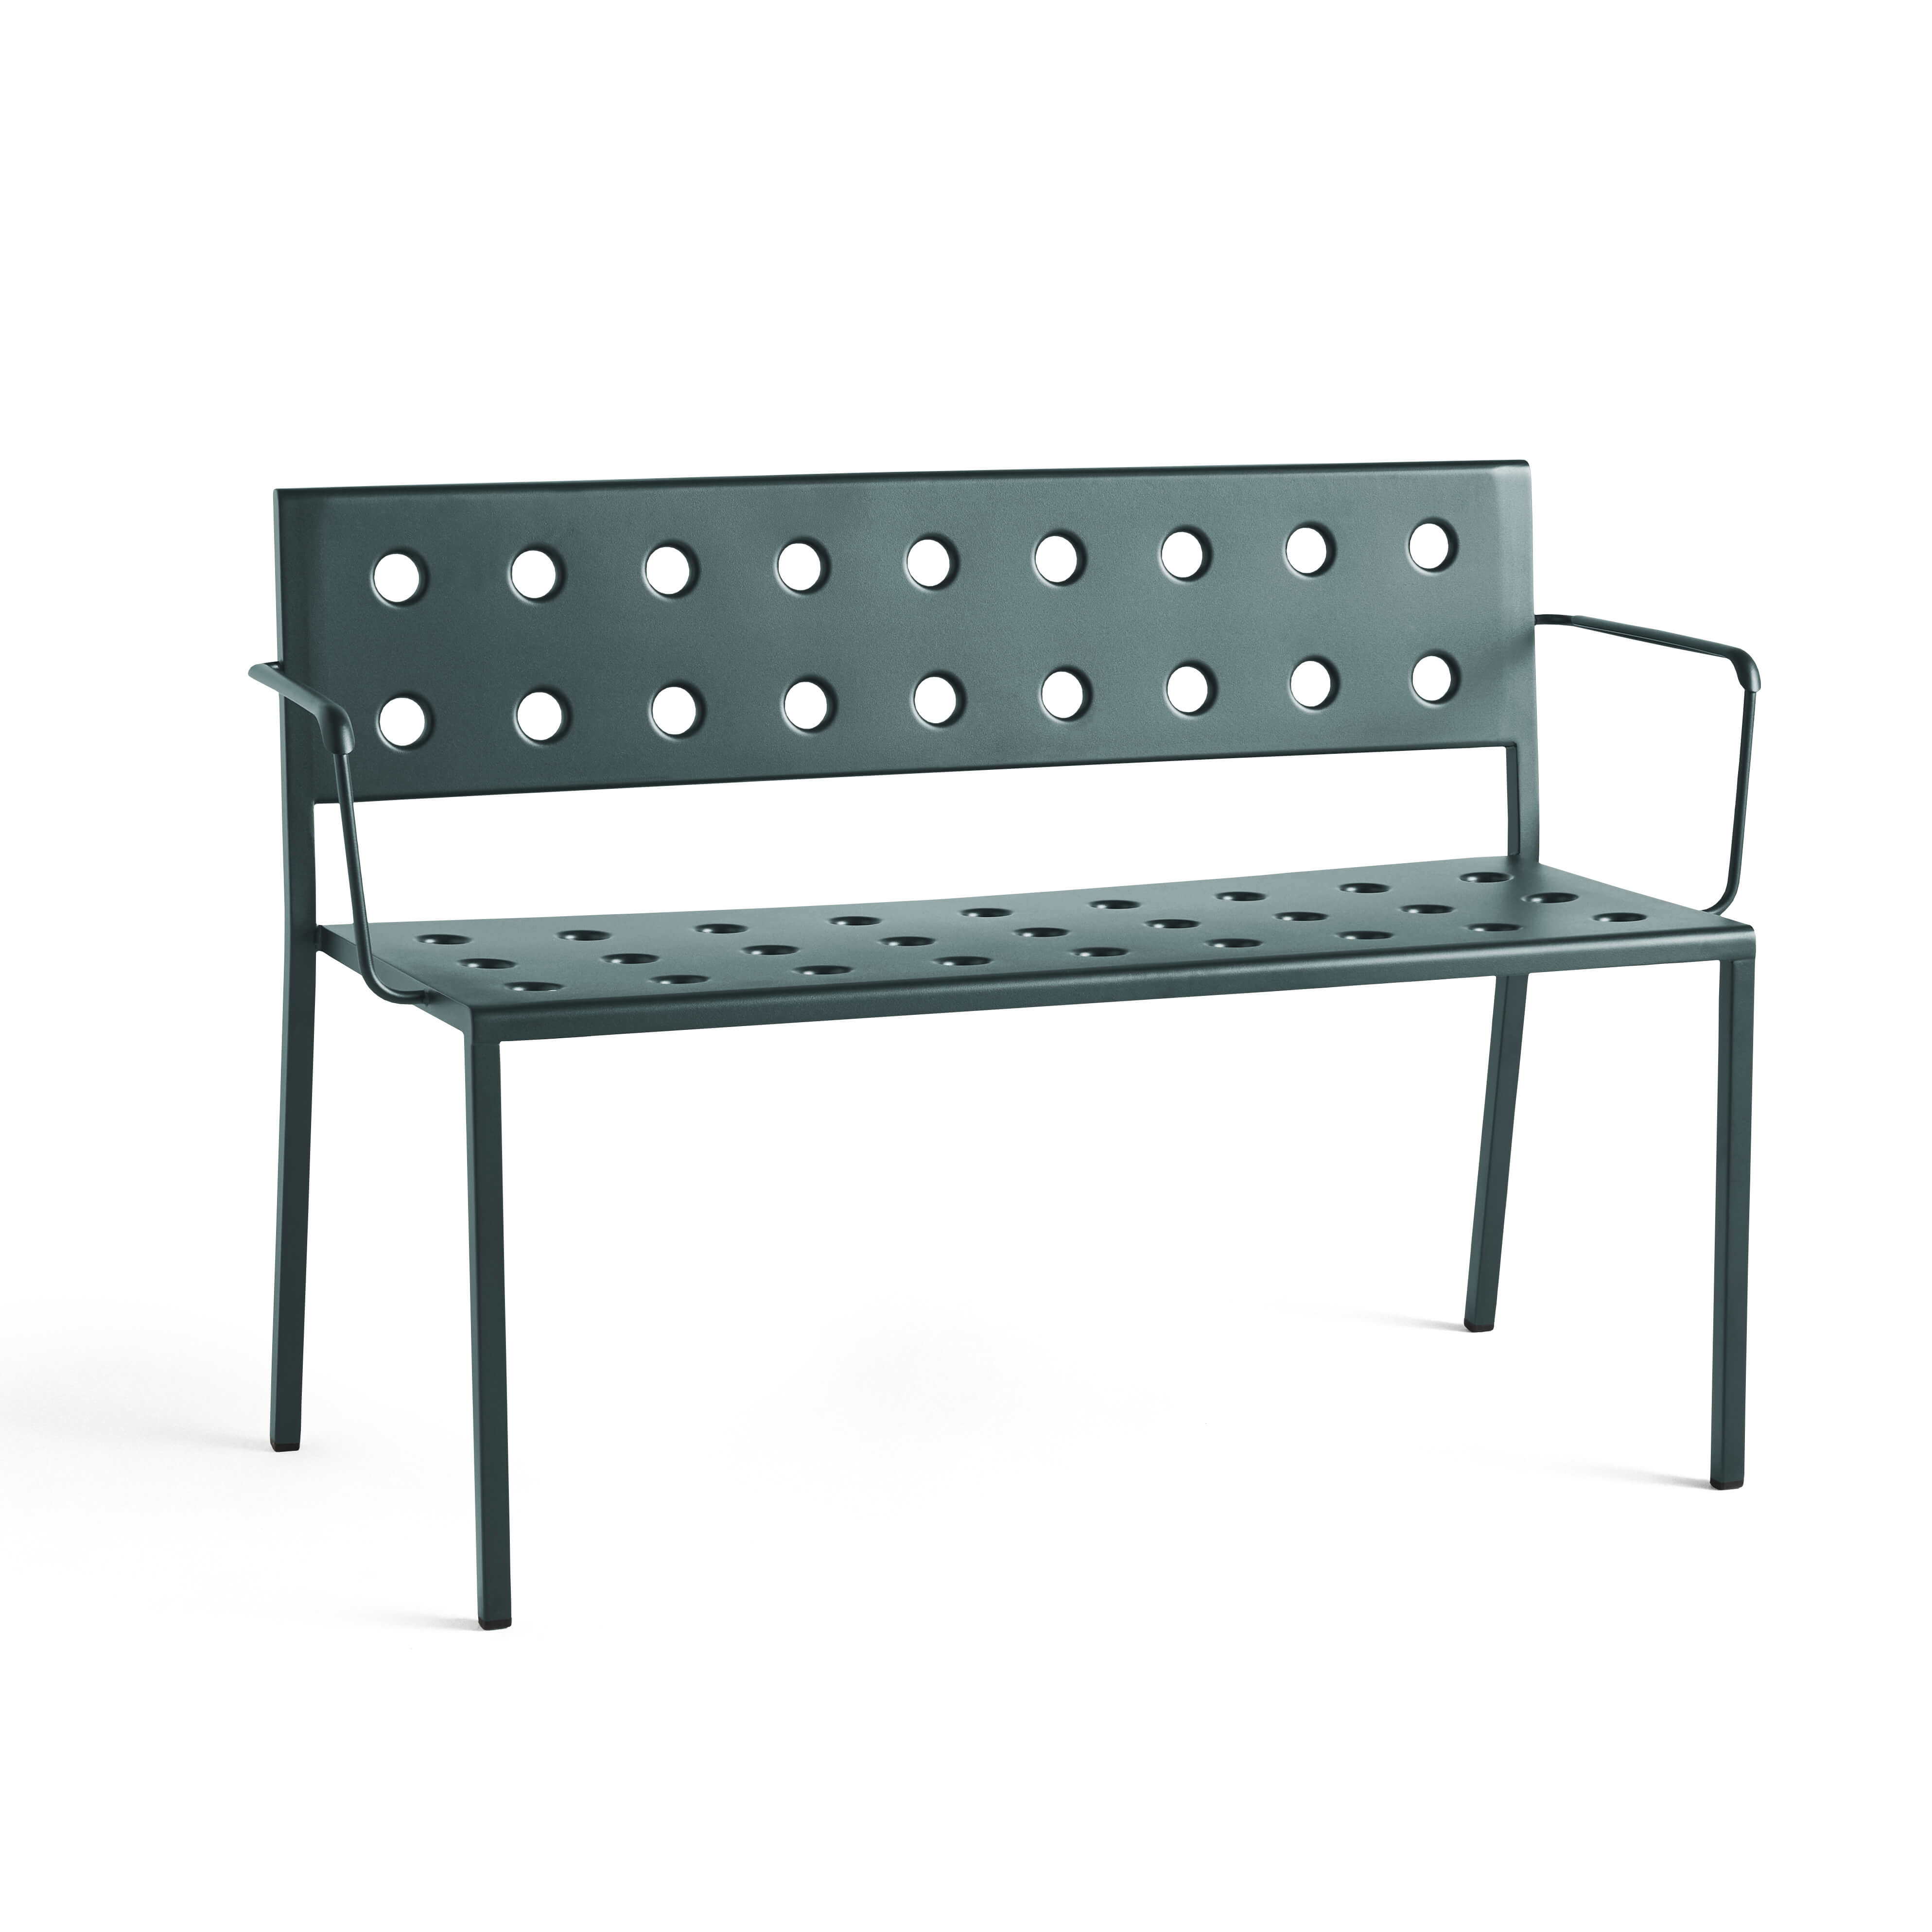 Balcony dining bench with arm - Dark forest